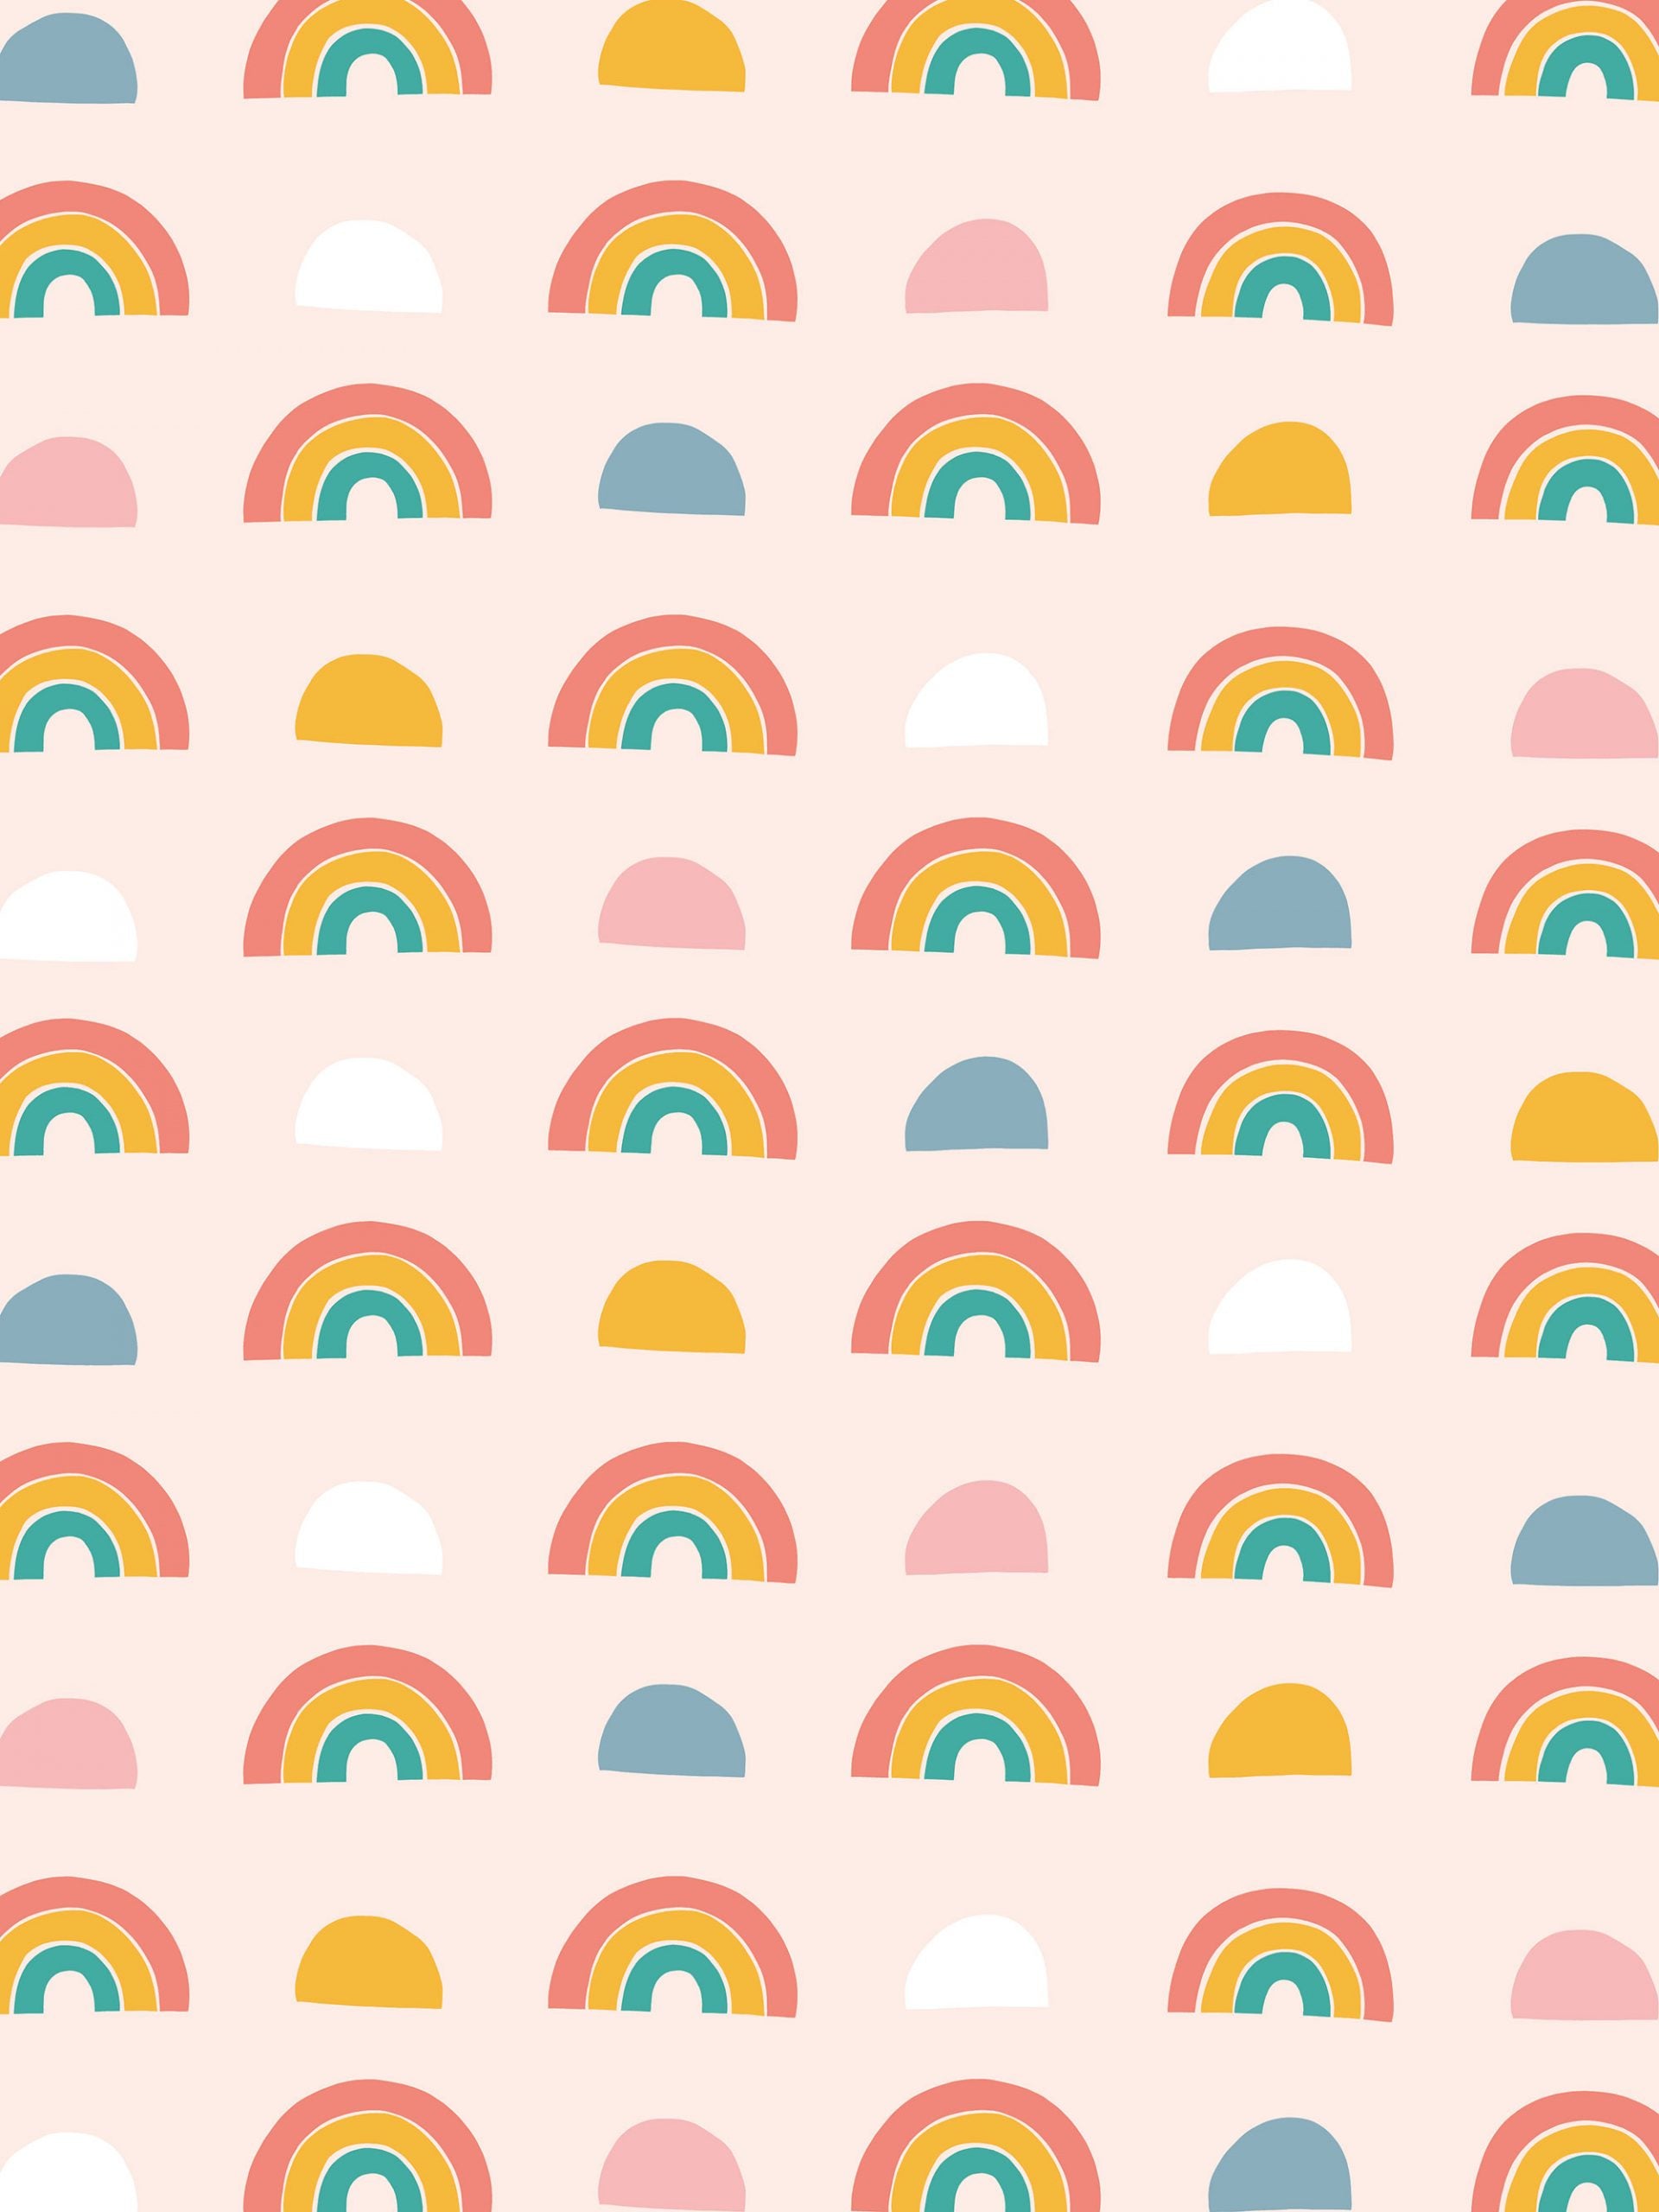 Rainbow Patterned Desktop Tablet And Phone Wallpaper Make And Tell Find the best rainbow wallpaper on wallpapertag. make and tell